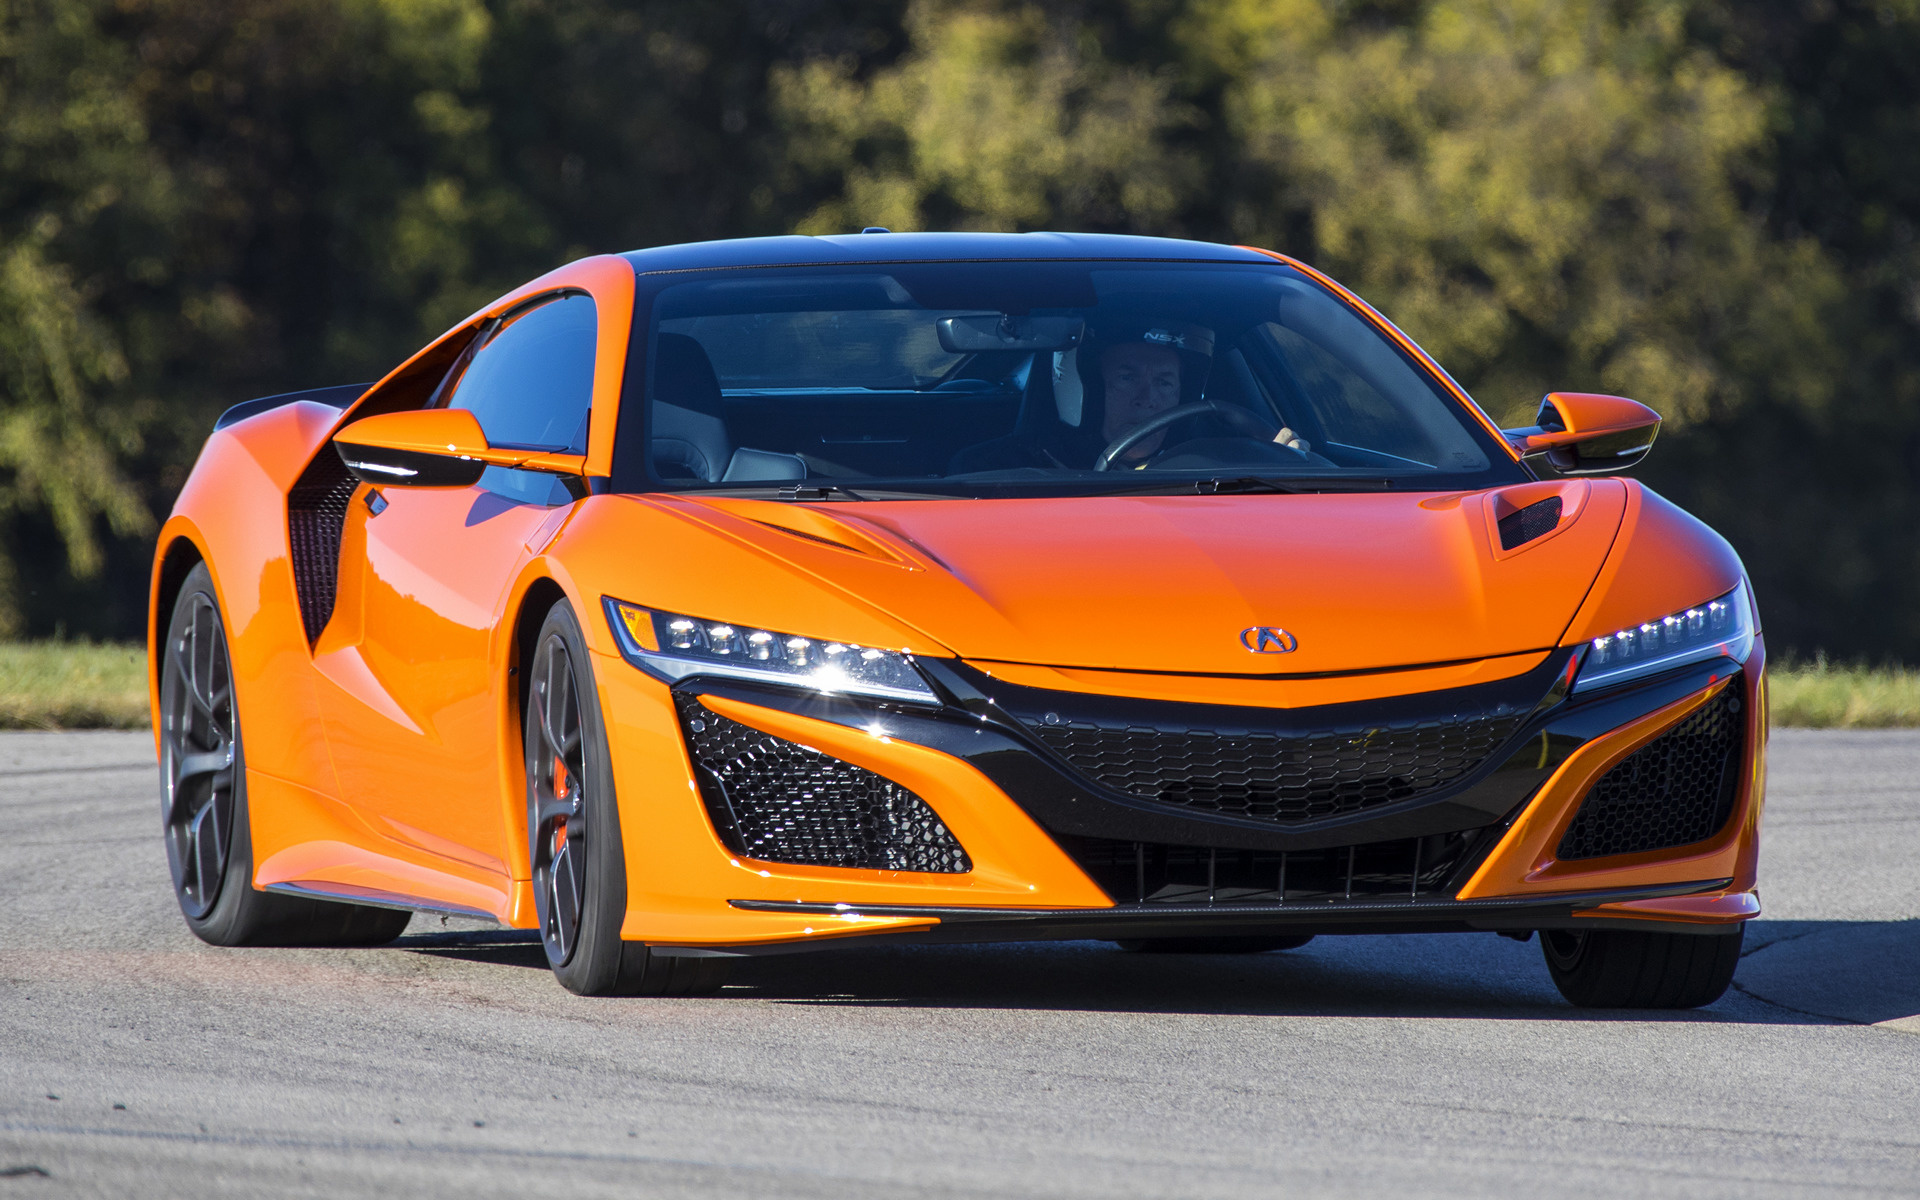 2019 Acura NSX Wallpapers | SuperCars.net